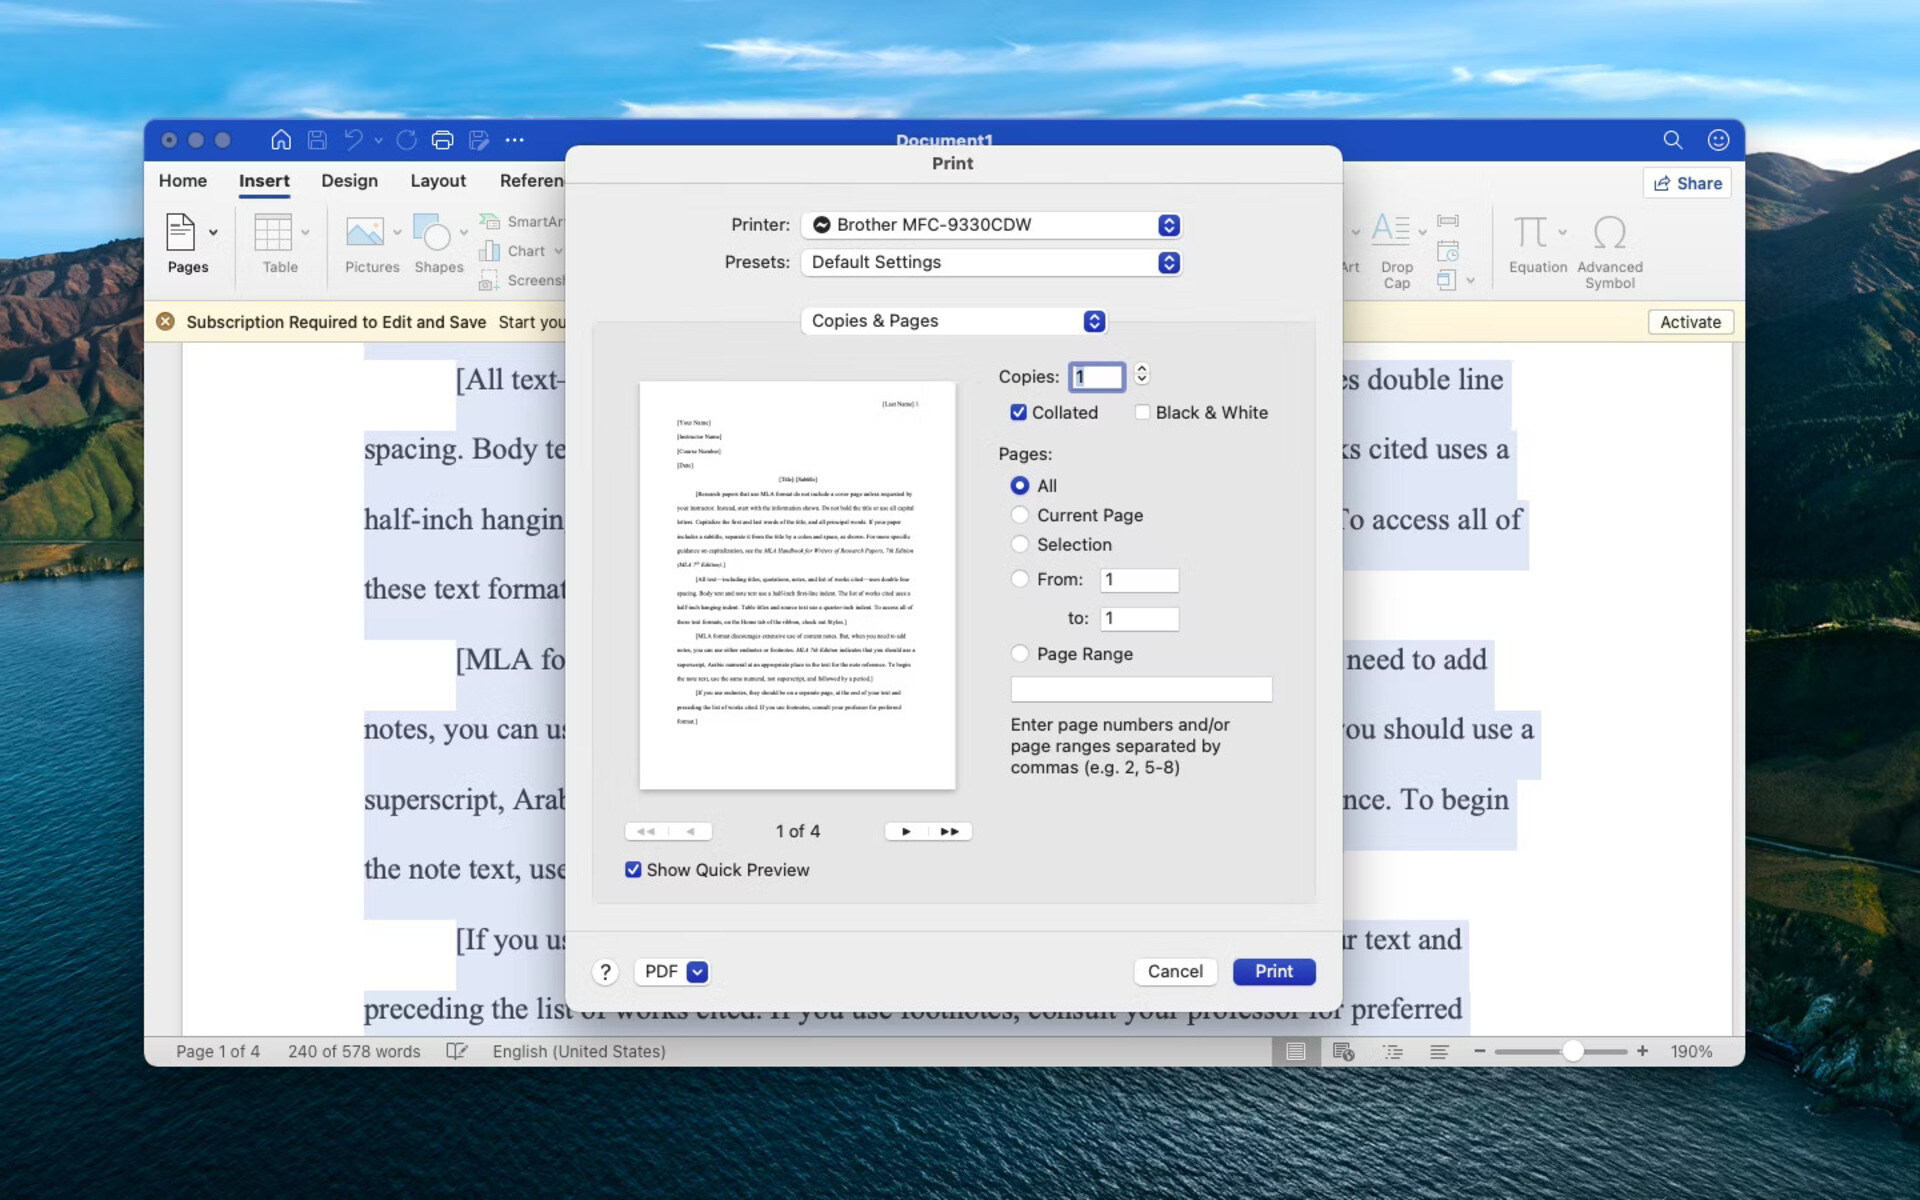 How To Save A Preview Image With Word Documents